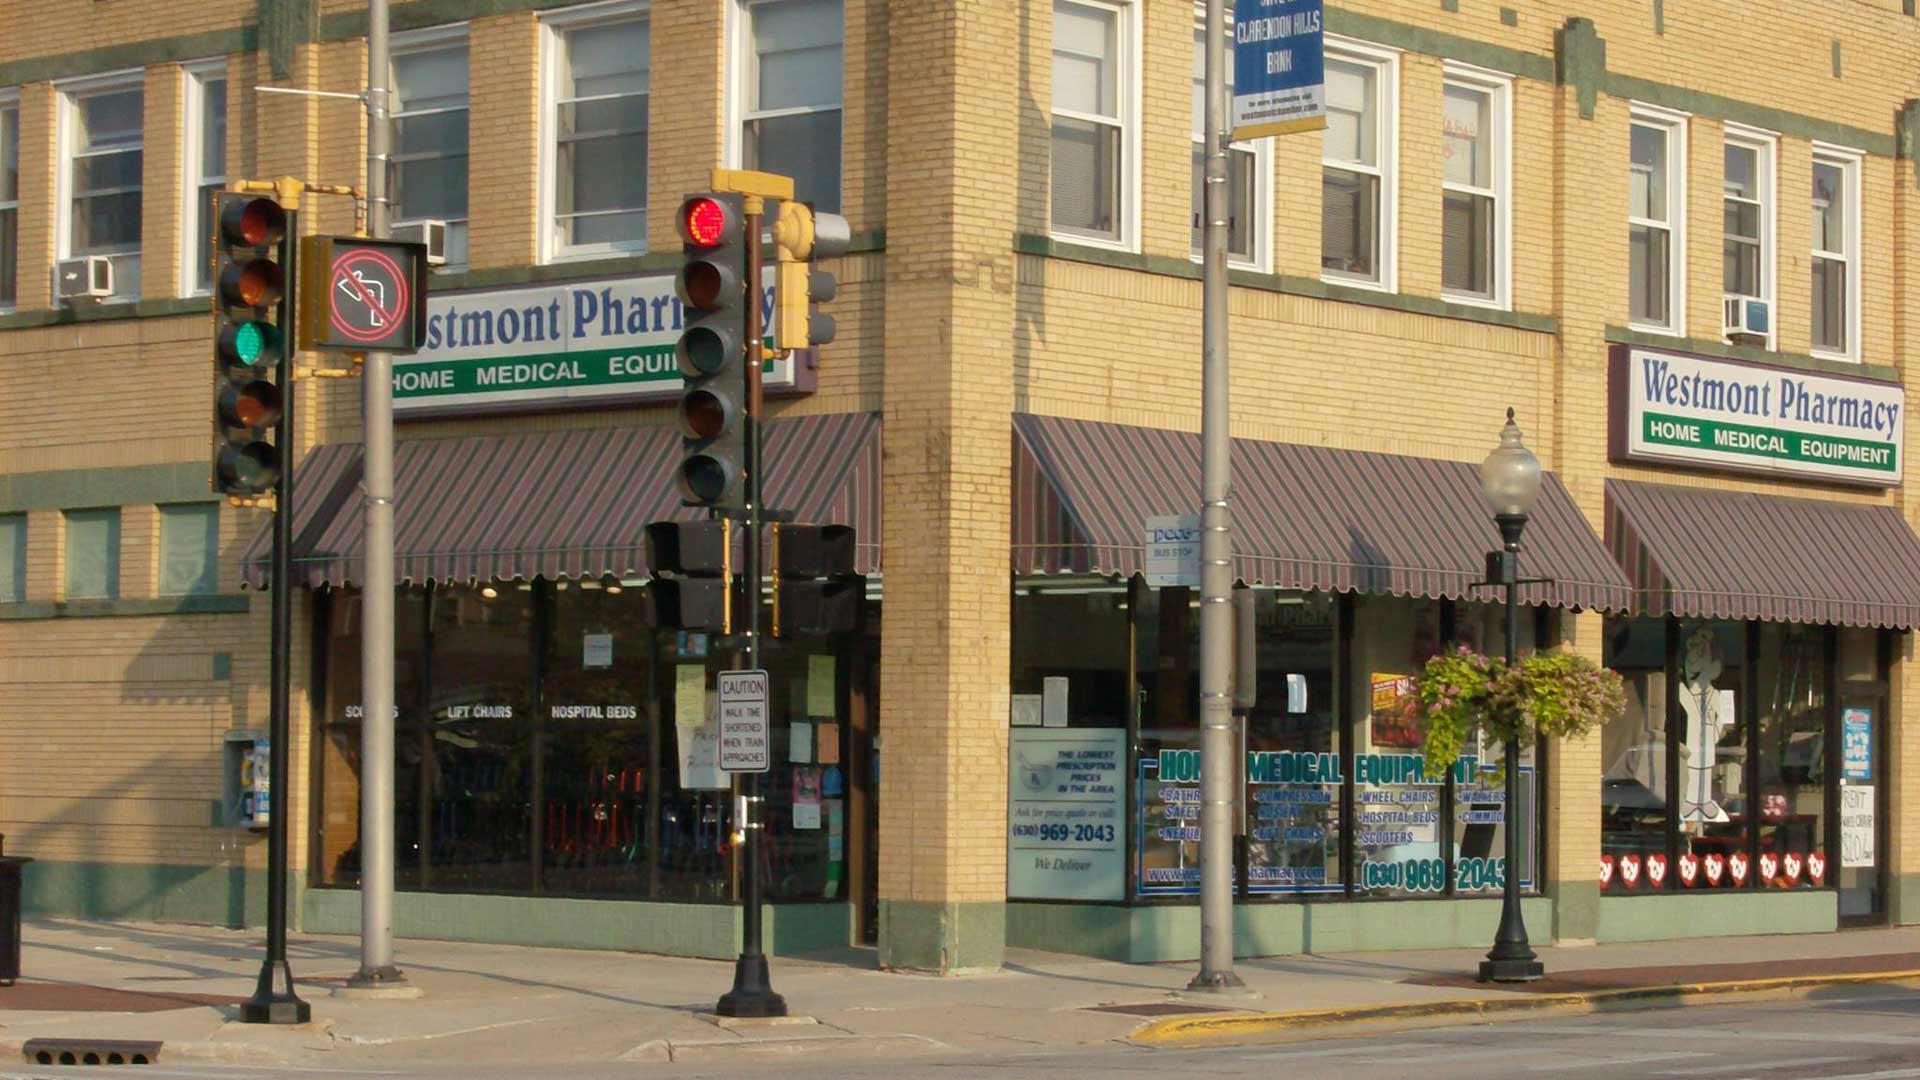 Westmont Pharmacy 2 N Cass Ave, Westmont, IL 60559 - YP.com